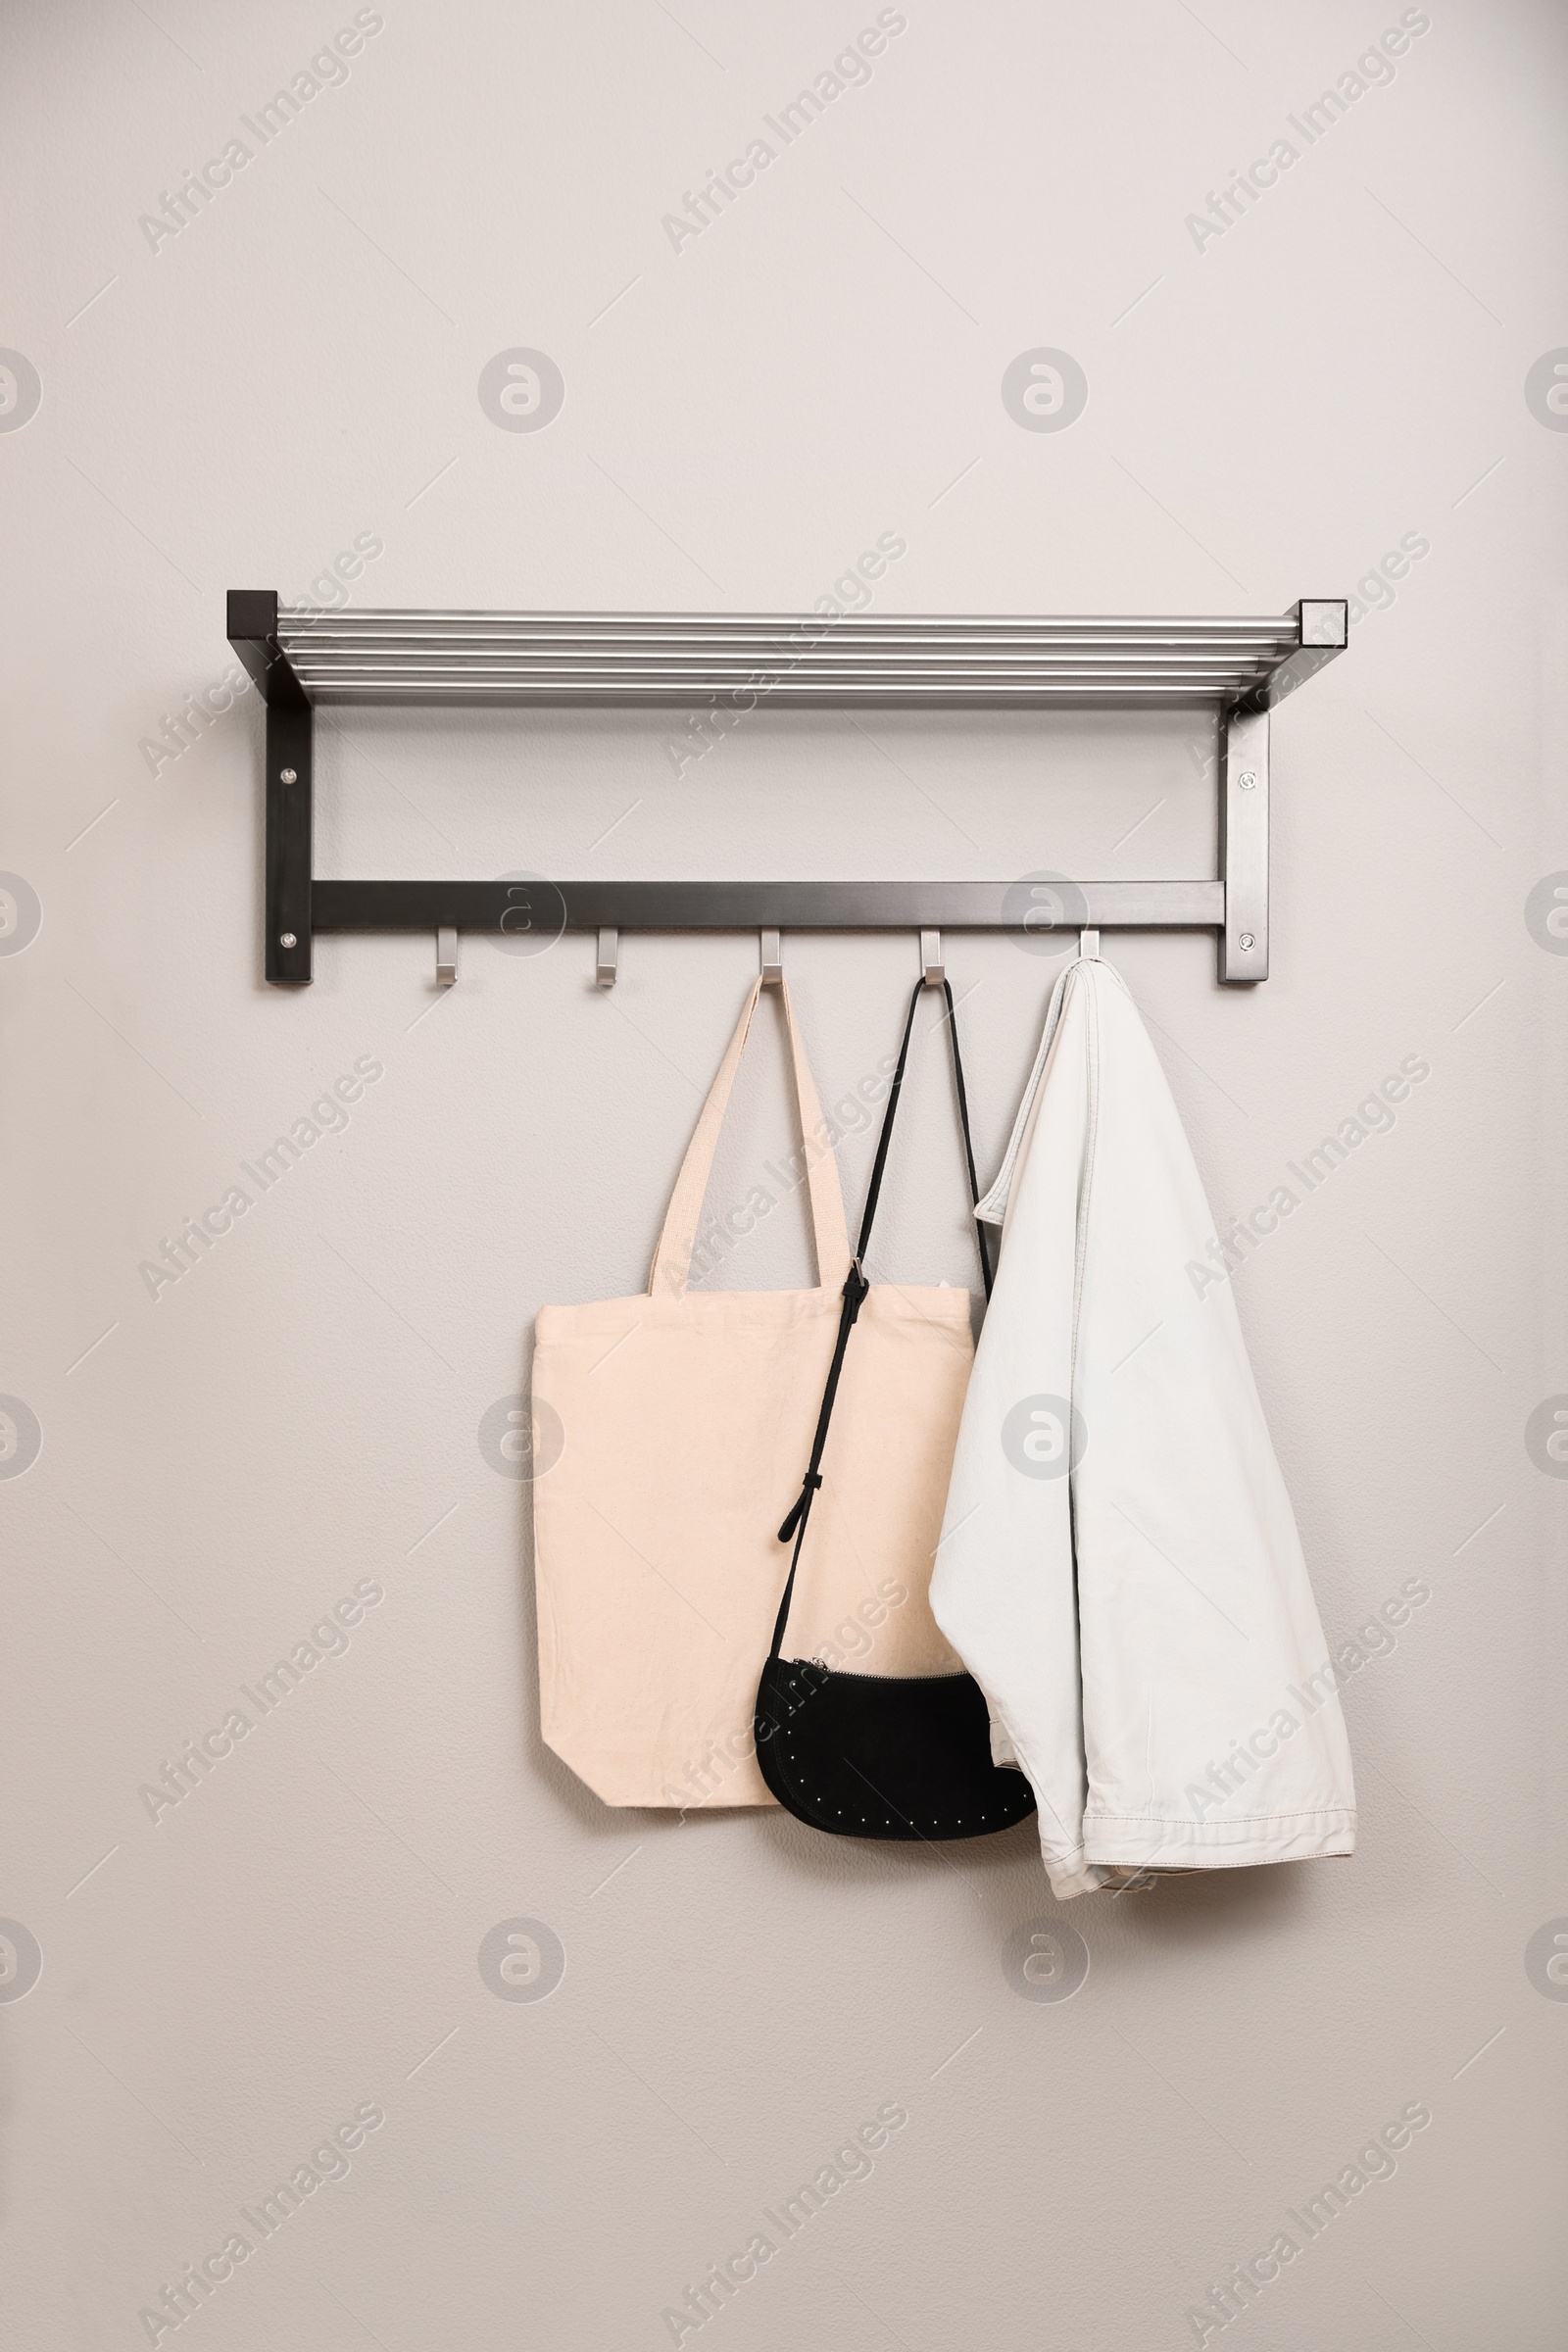 Photo of Bags and clothes on coat rack in hallway. Interior element